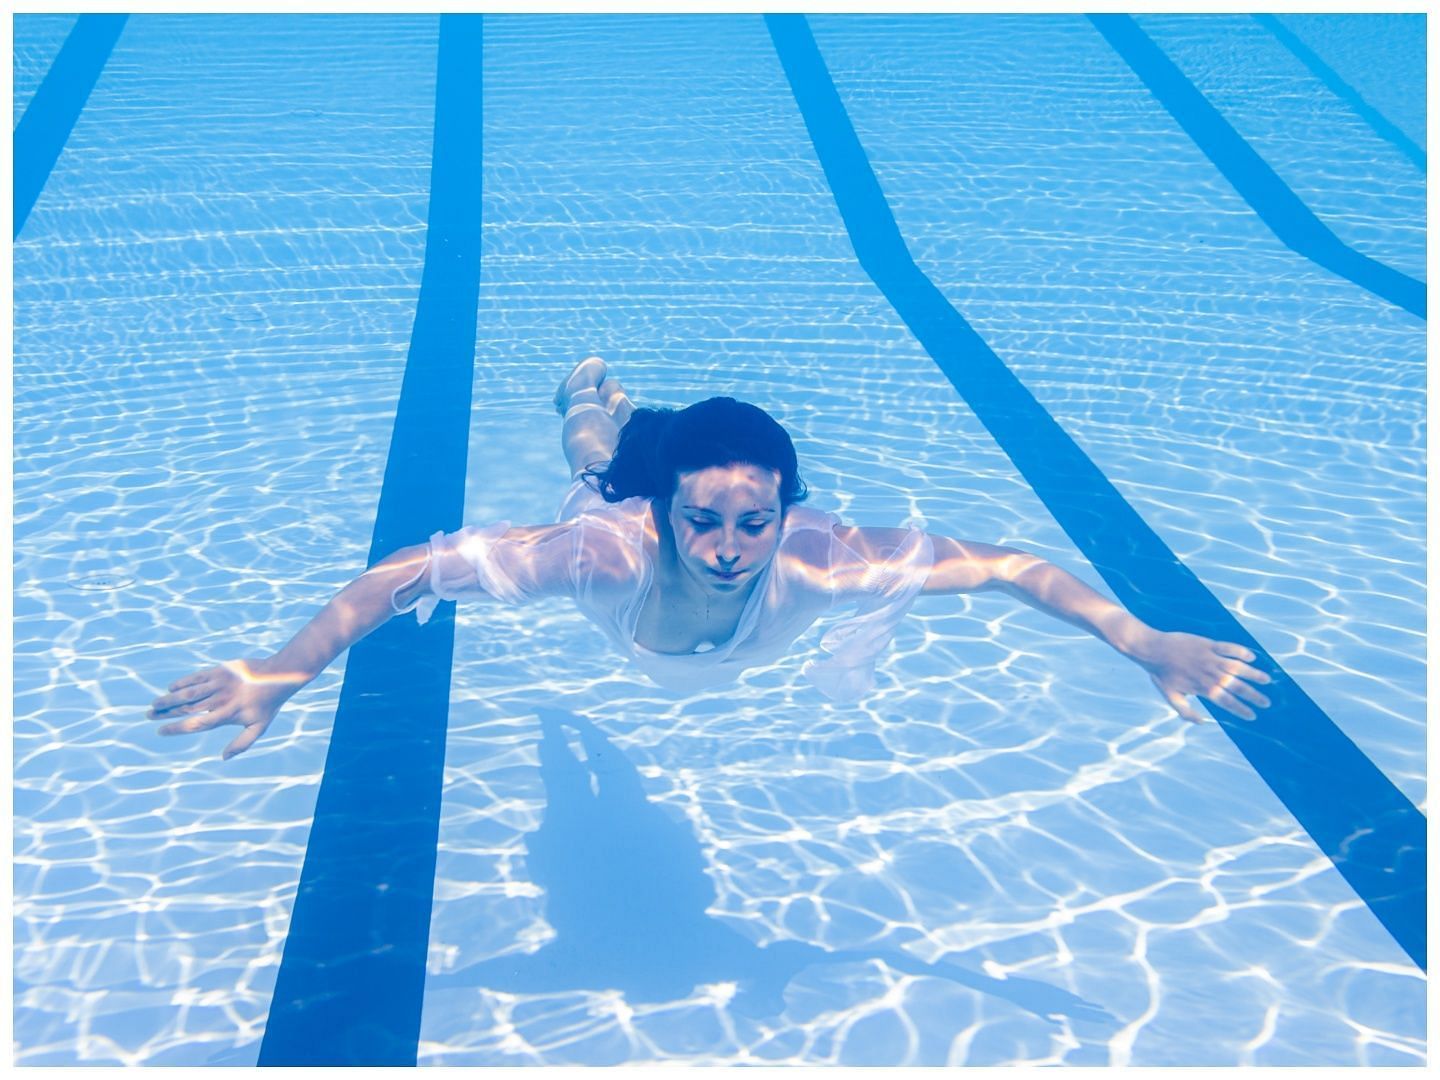 Swimming in cold water can prevent symptoms of menopause (Image via Vecteezy)